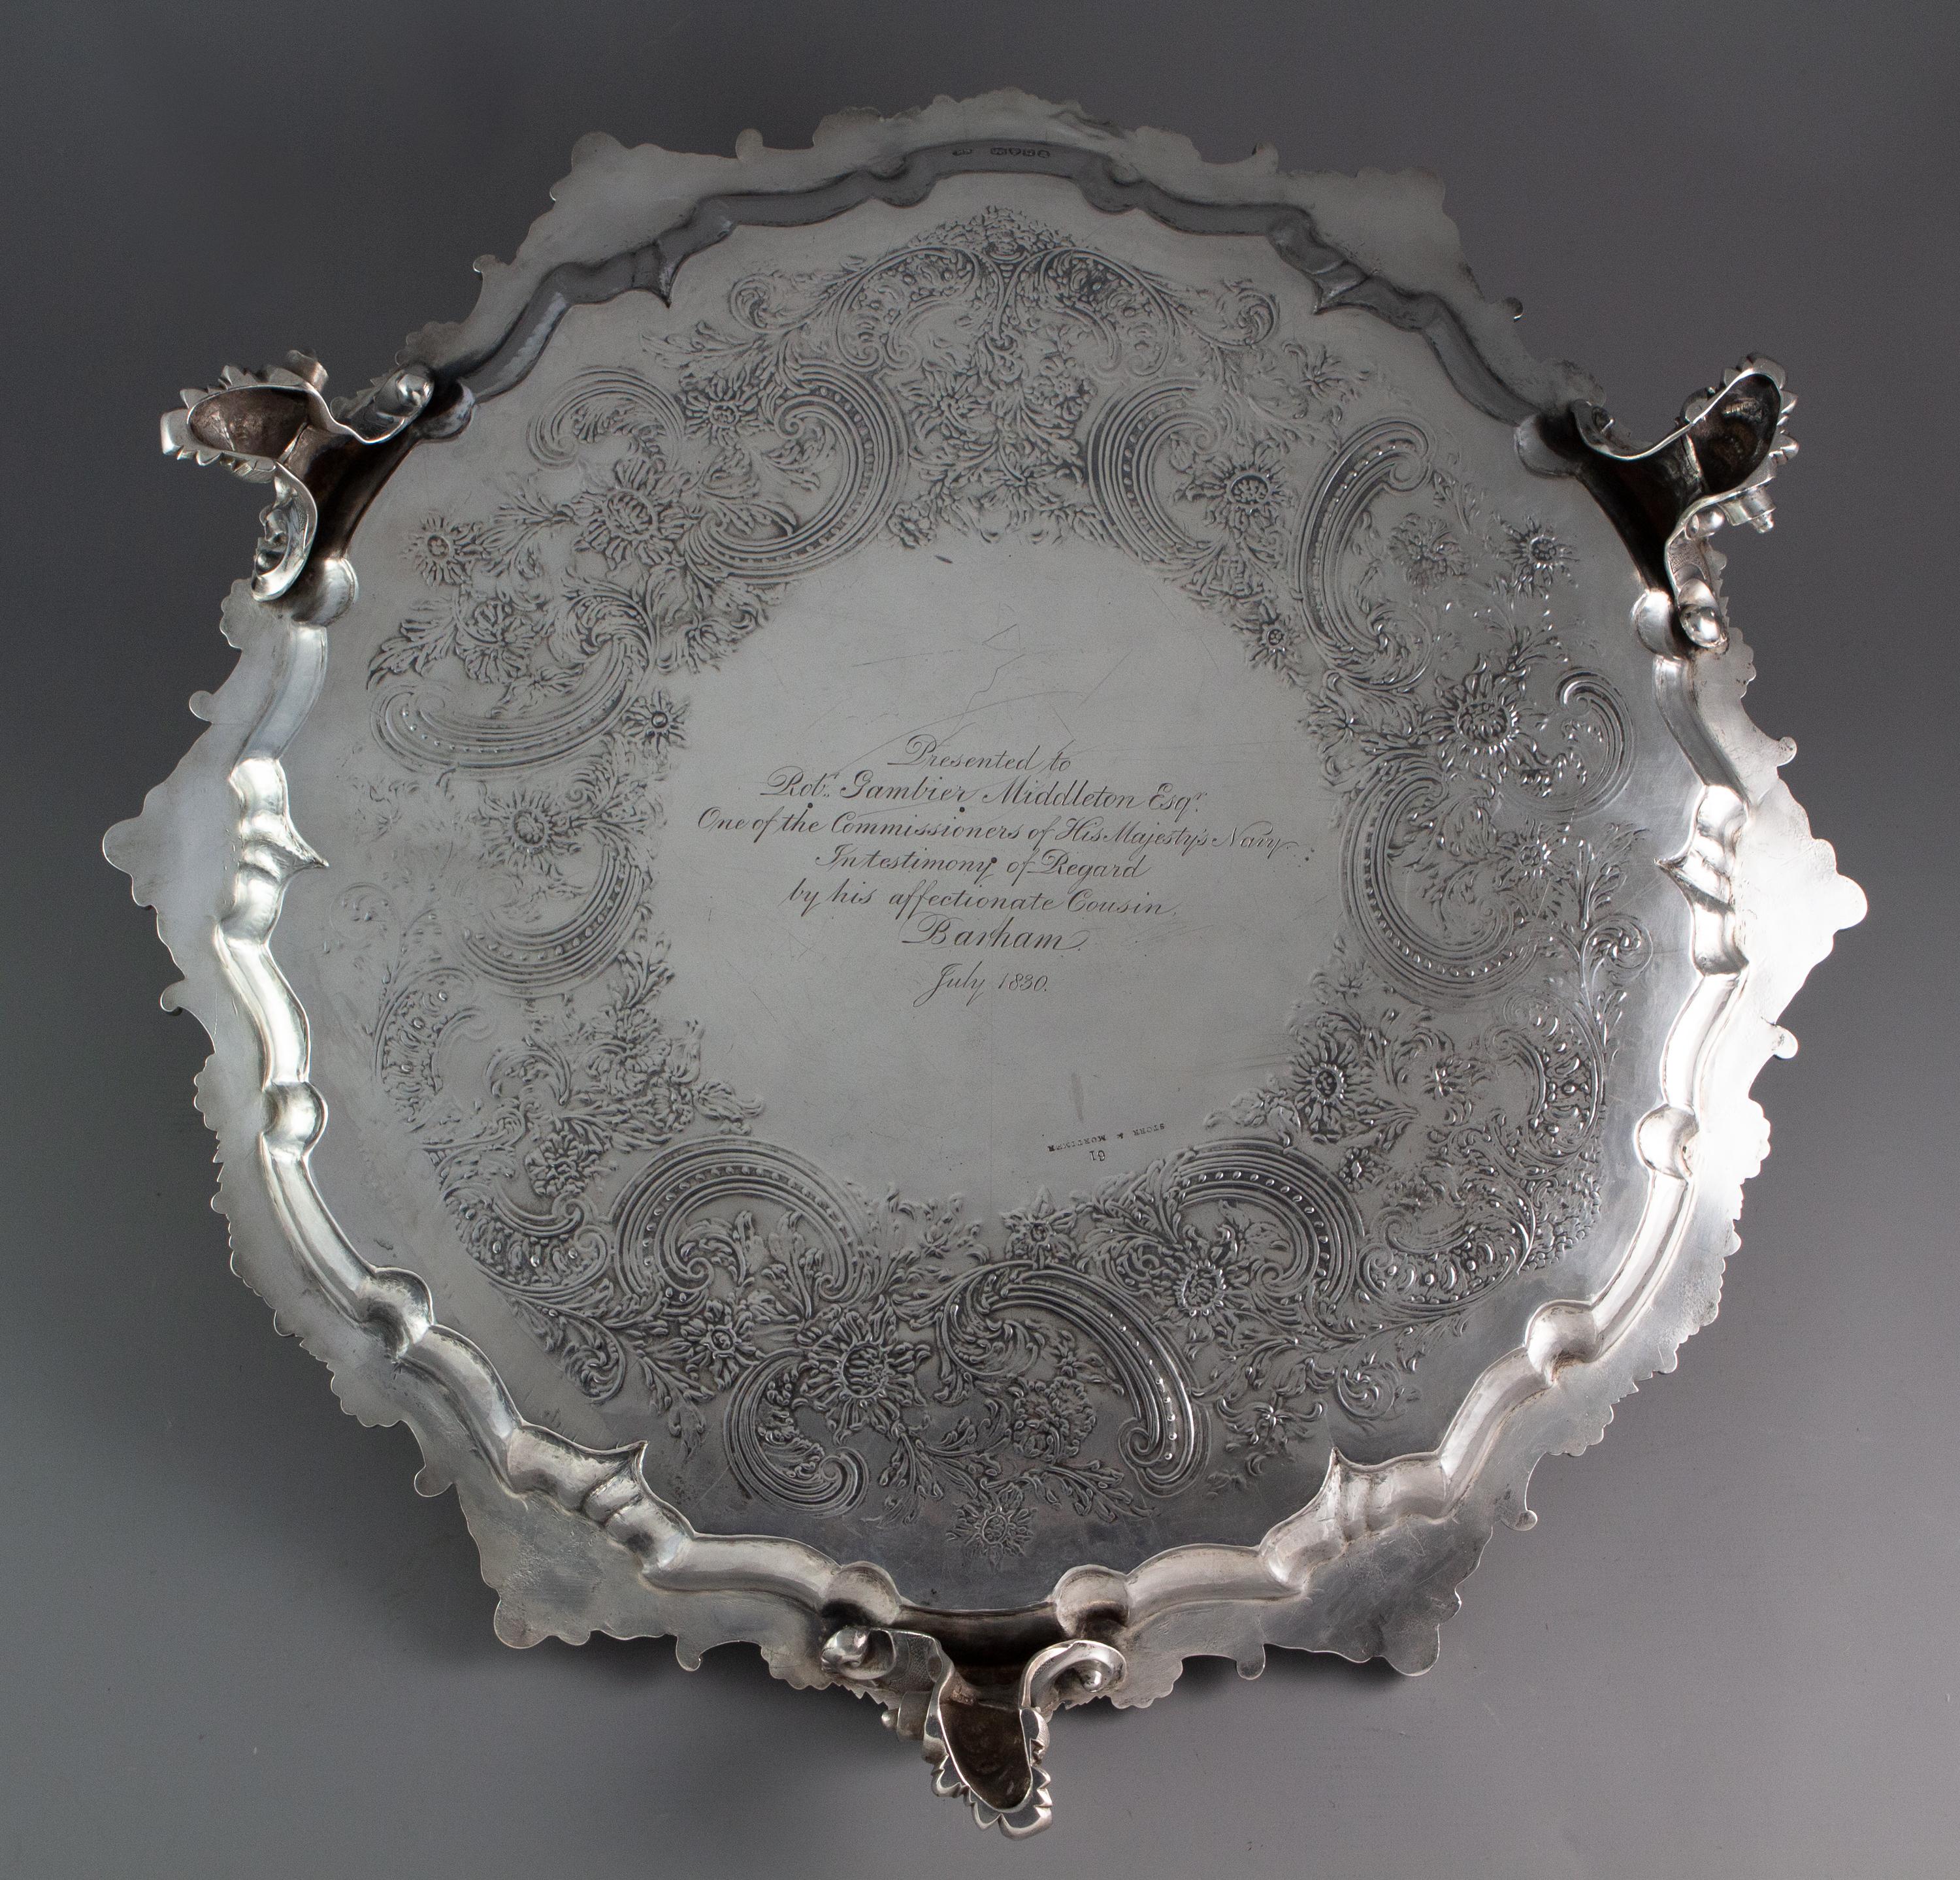 Early 19th Century Large Georgian Silver Salver or Tray by Paul Storr, London, 1829